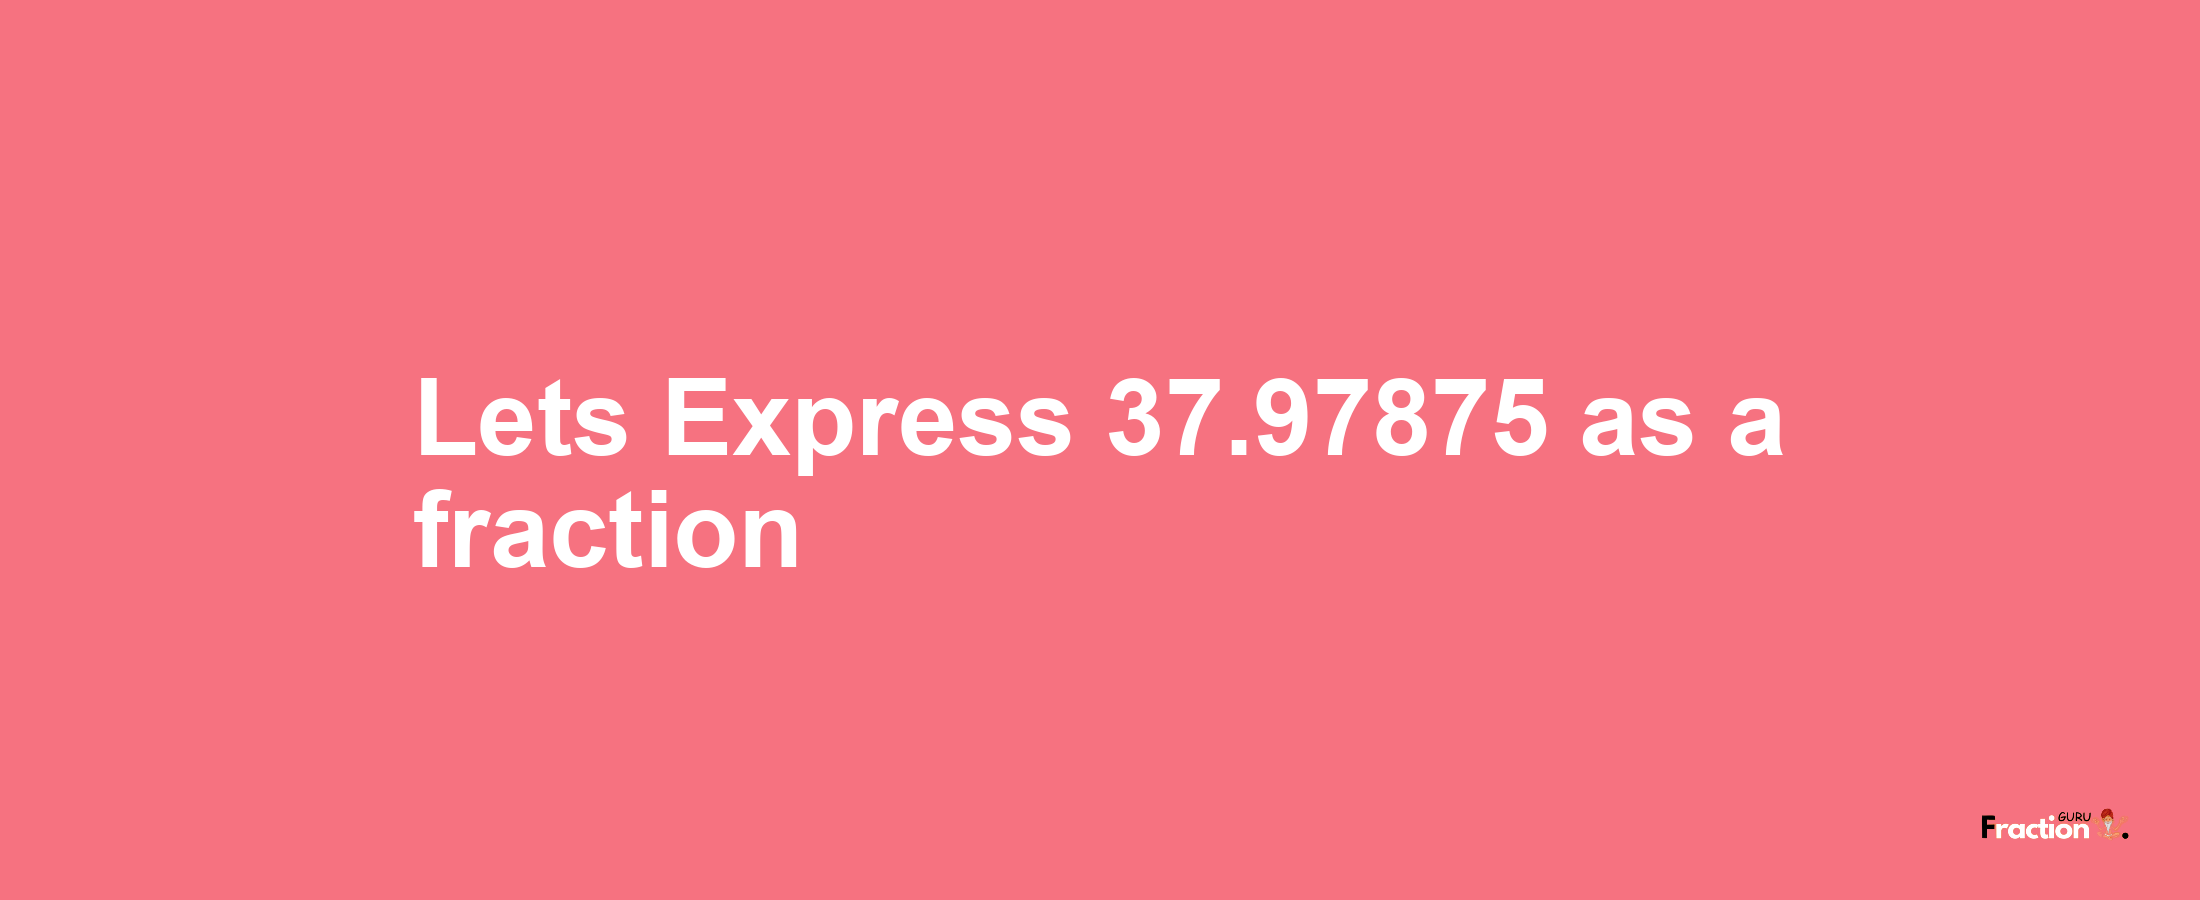 Lets Express 37.97875 as afraction